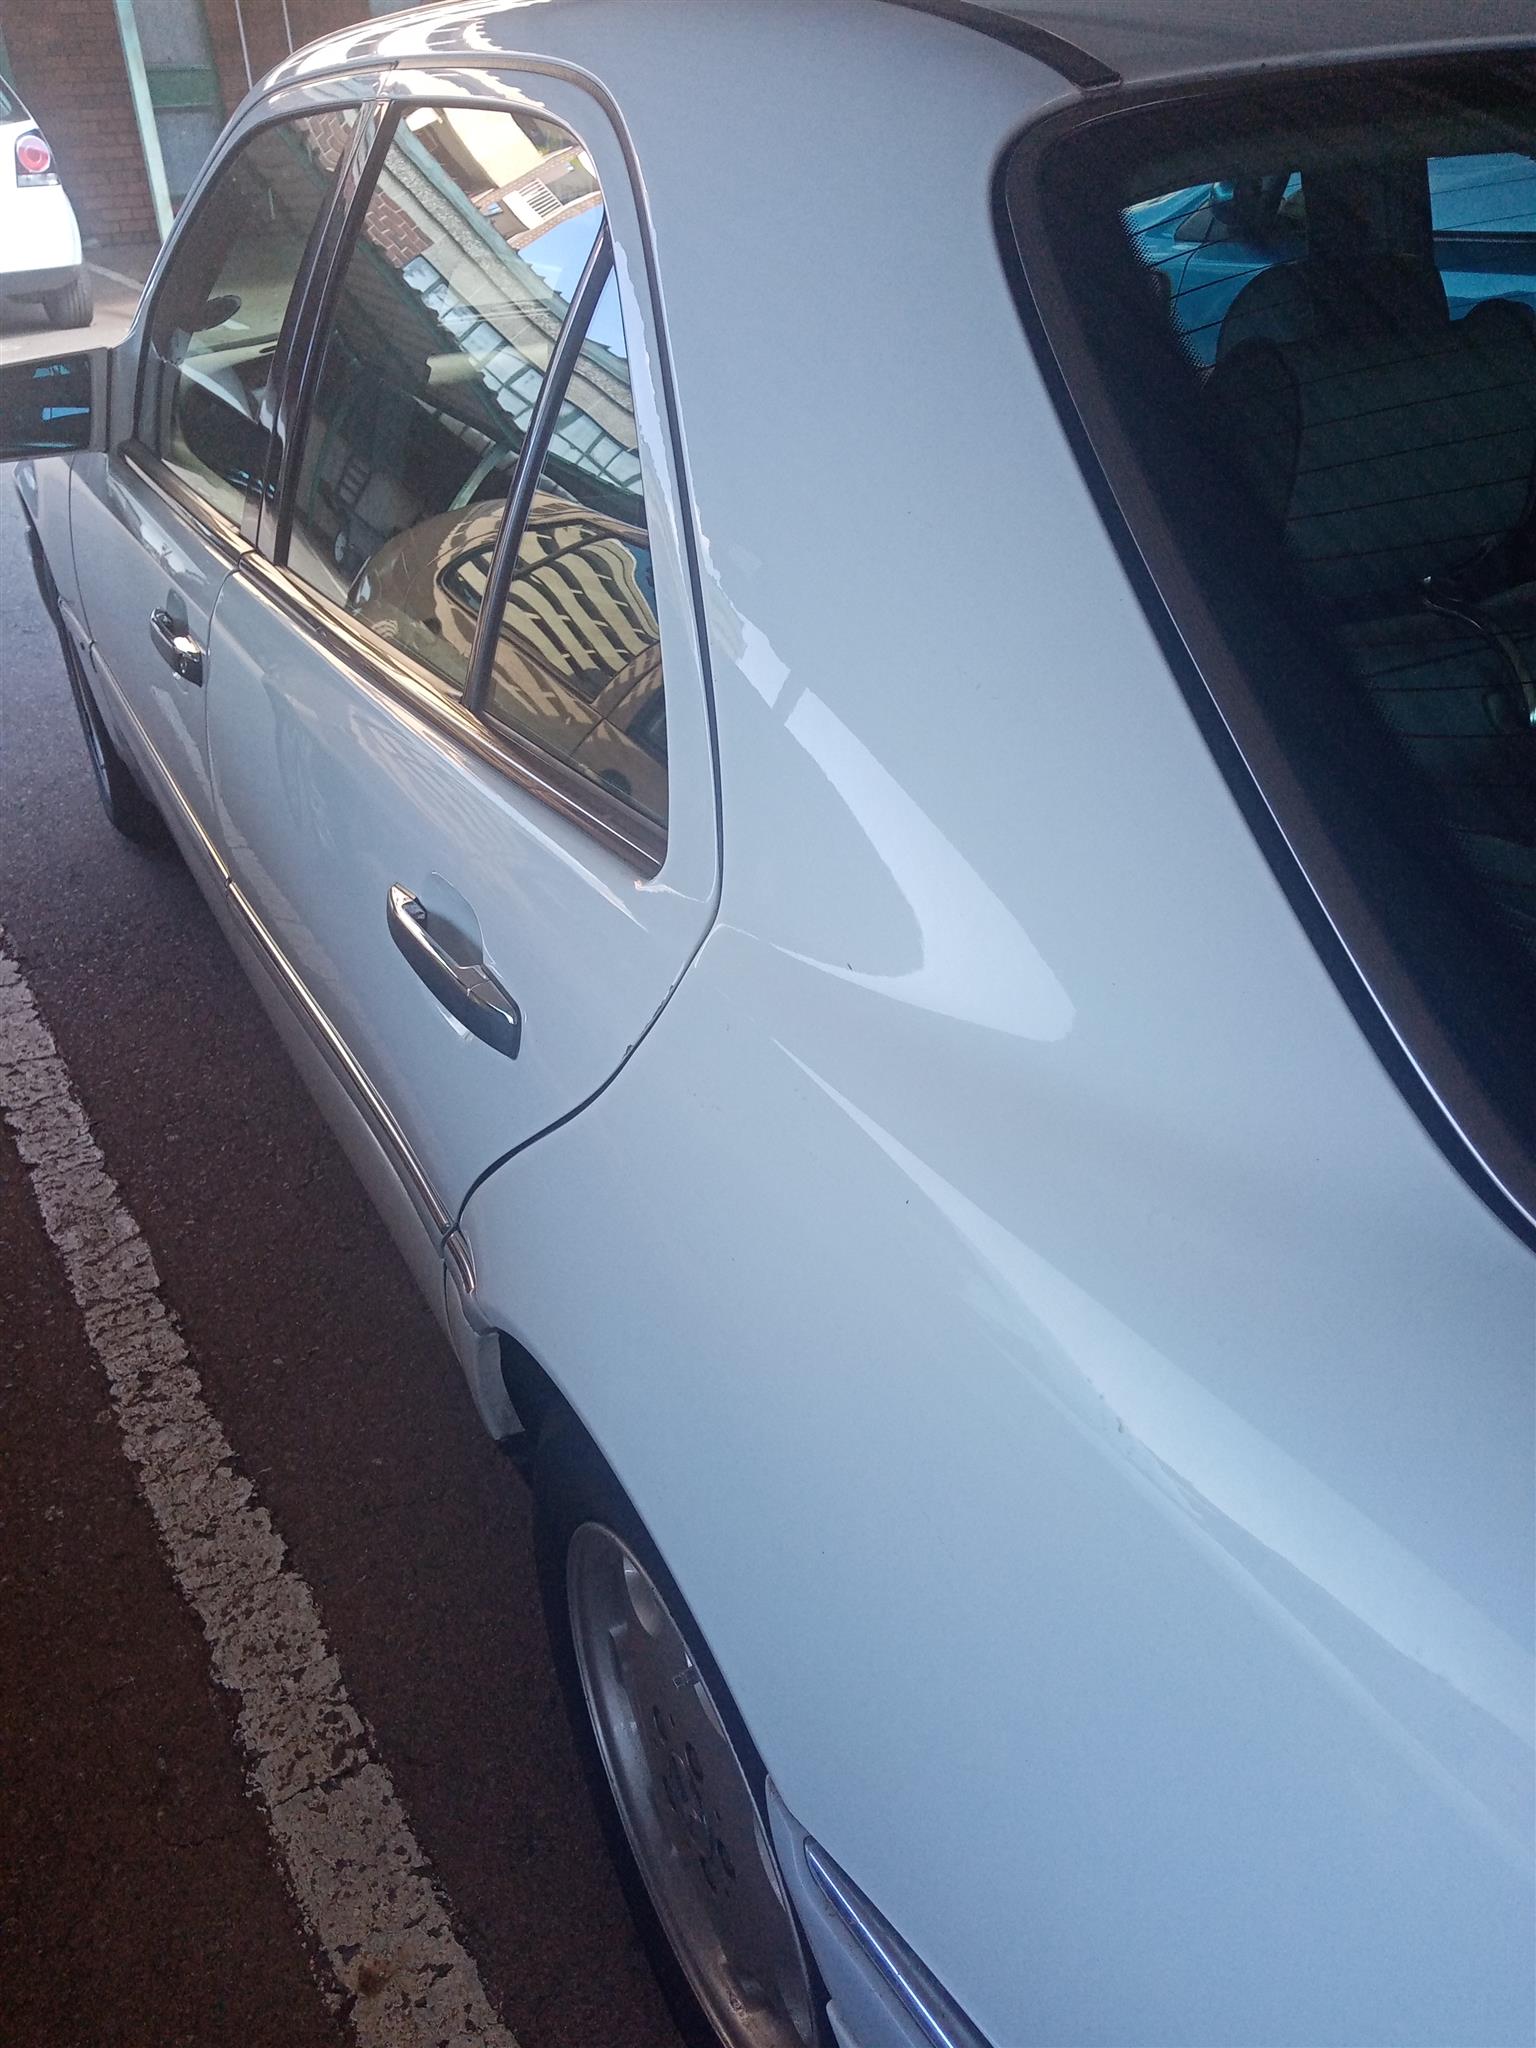 Mercedes w202 c220 1995 well looked after new windscreen, new suspension,. 